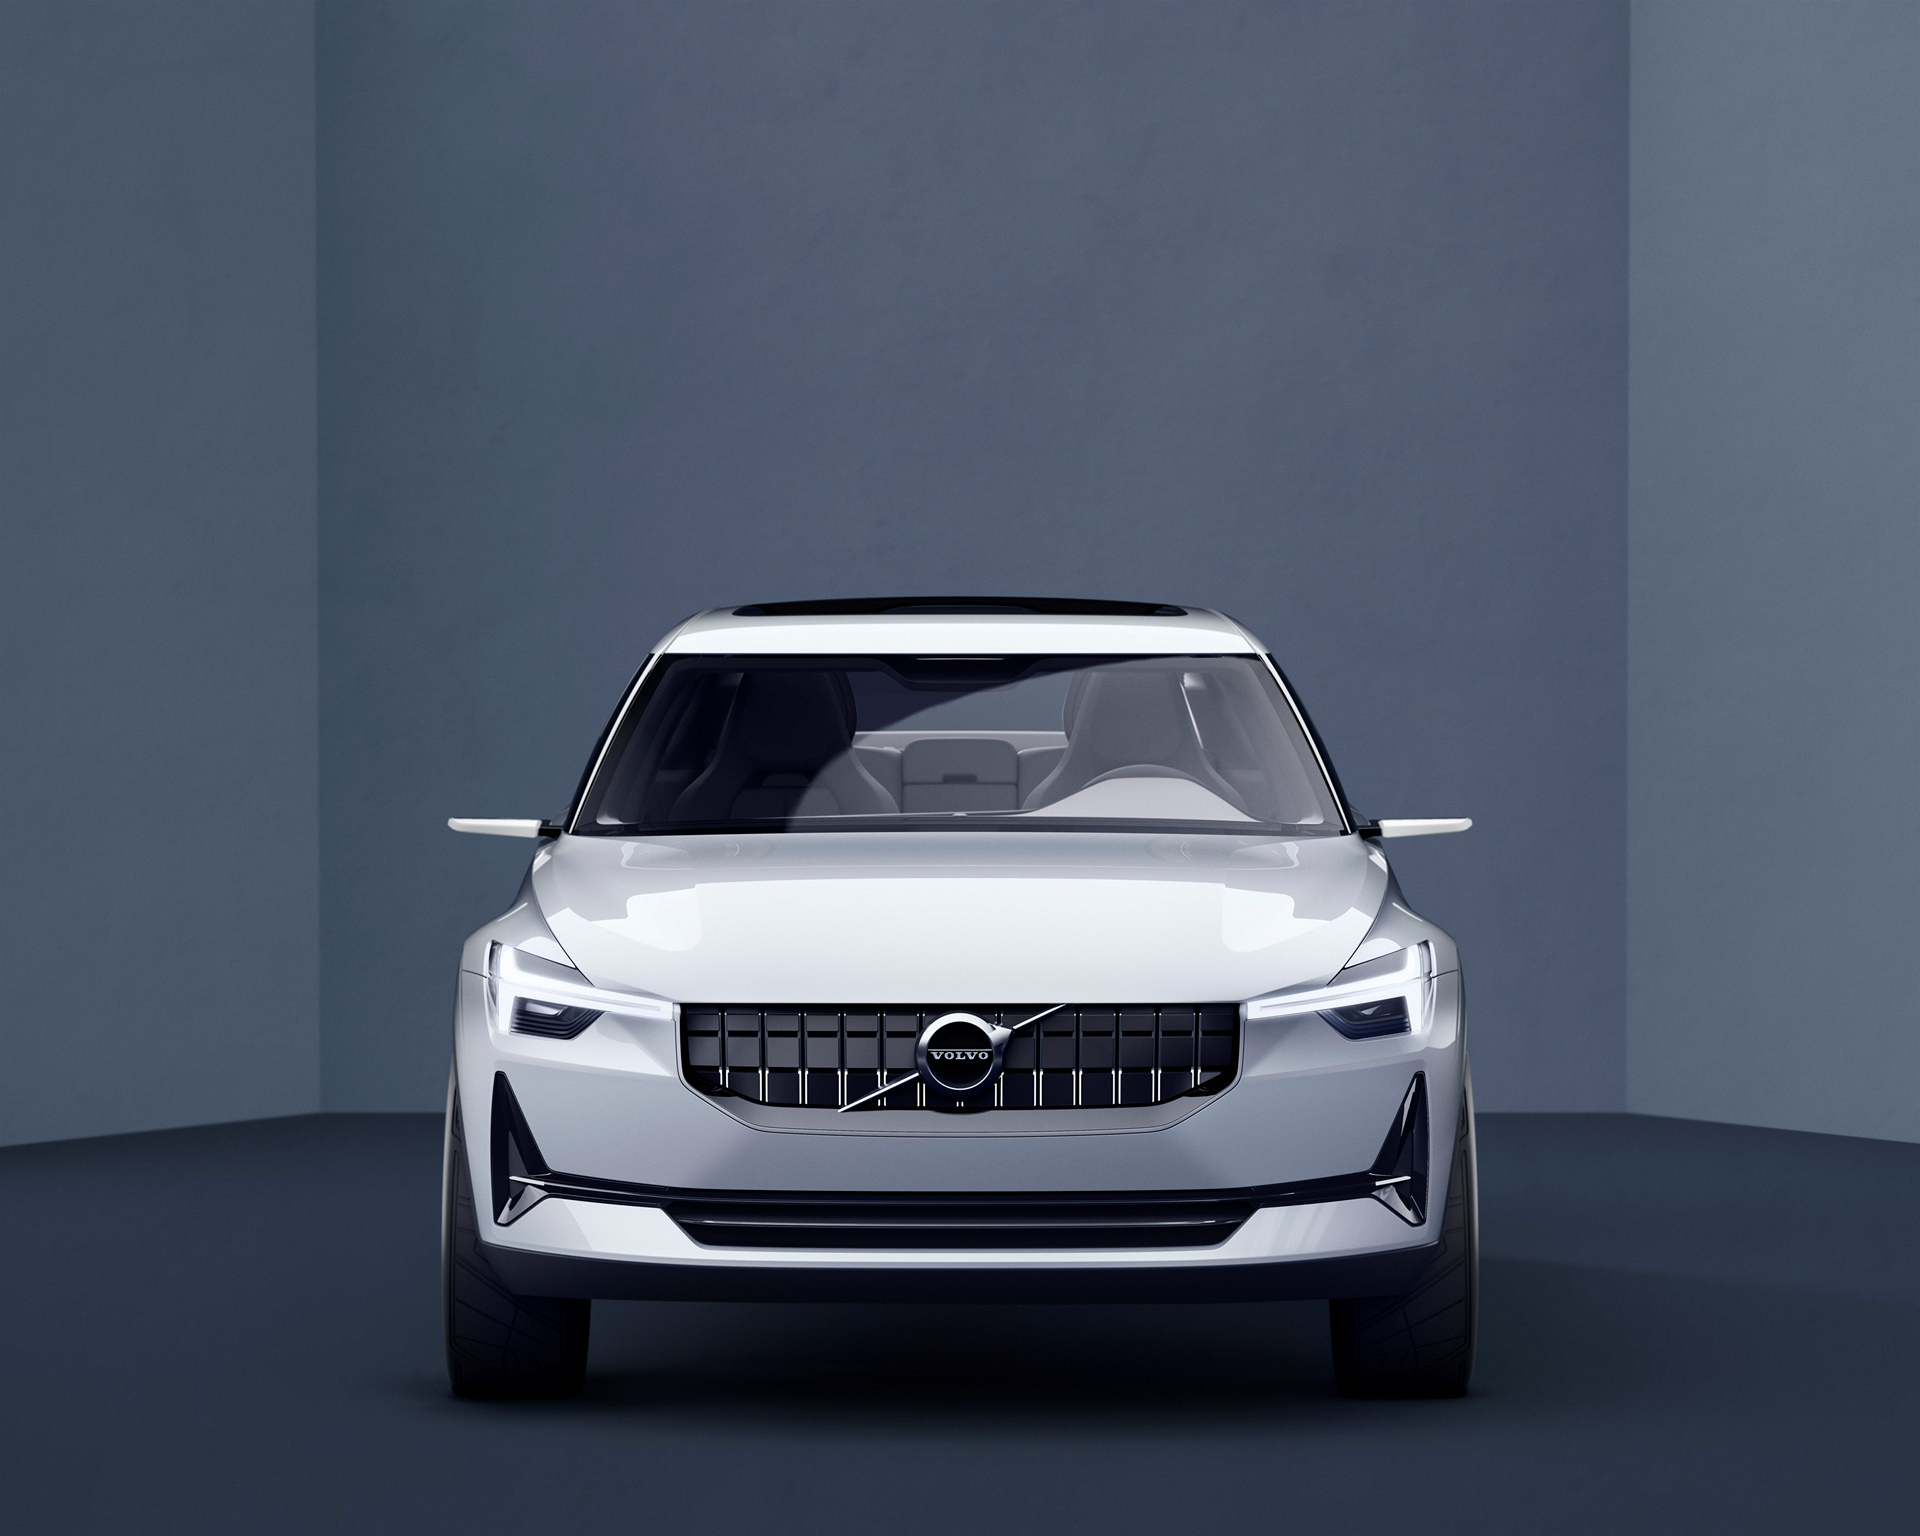 Volvo Concept 40.2 © Zhejiang Geely Holding Group Co., Ltd